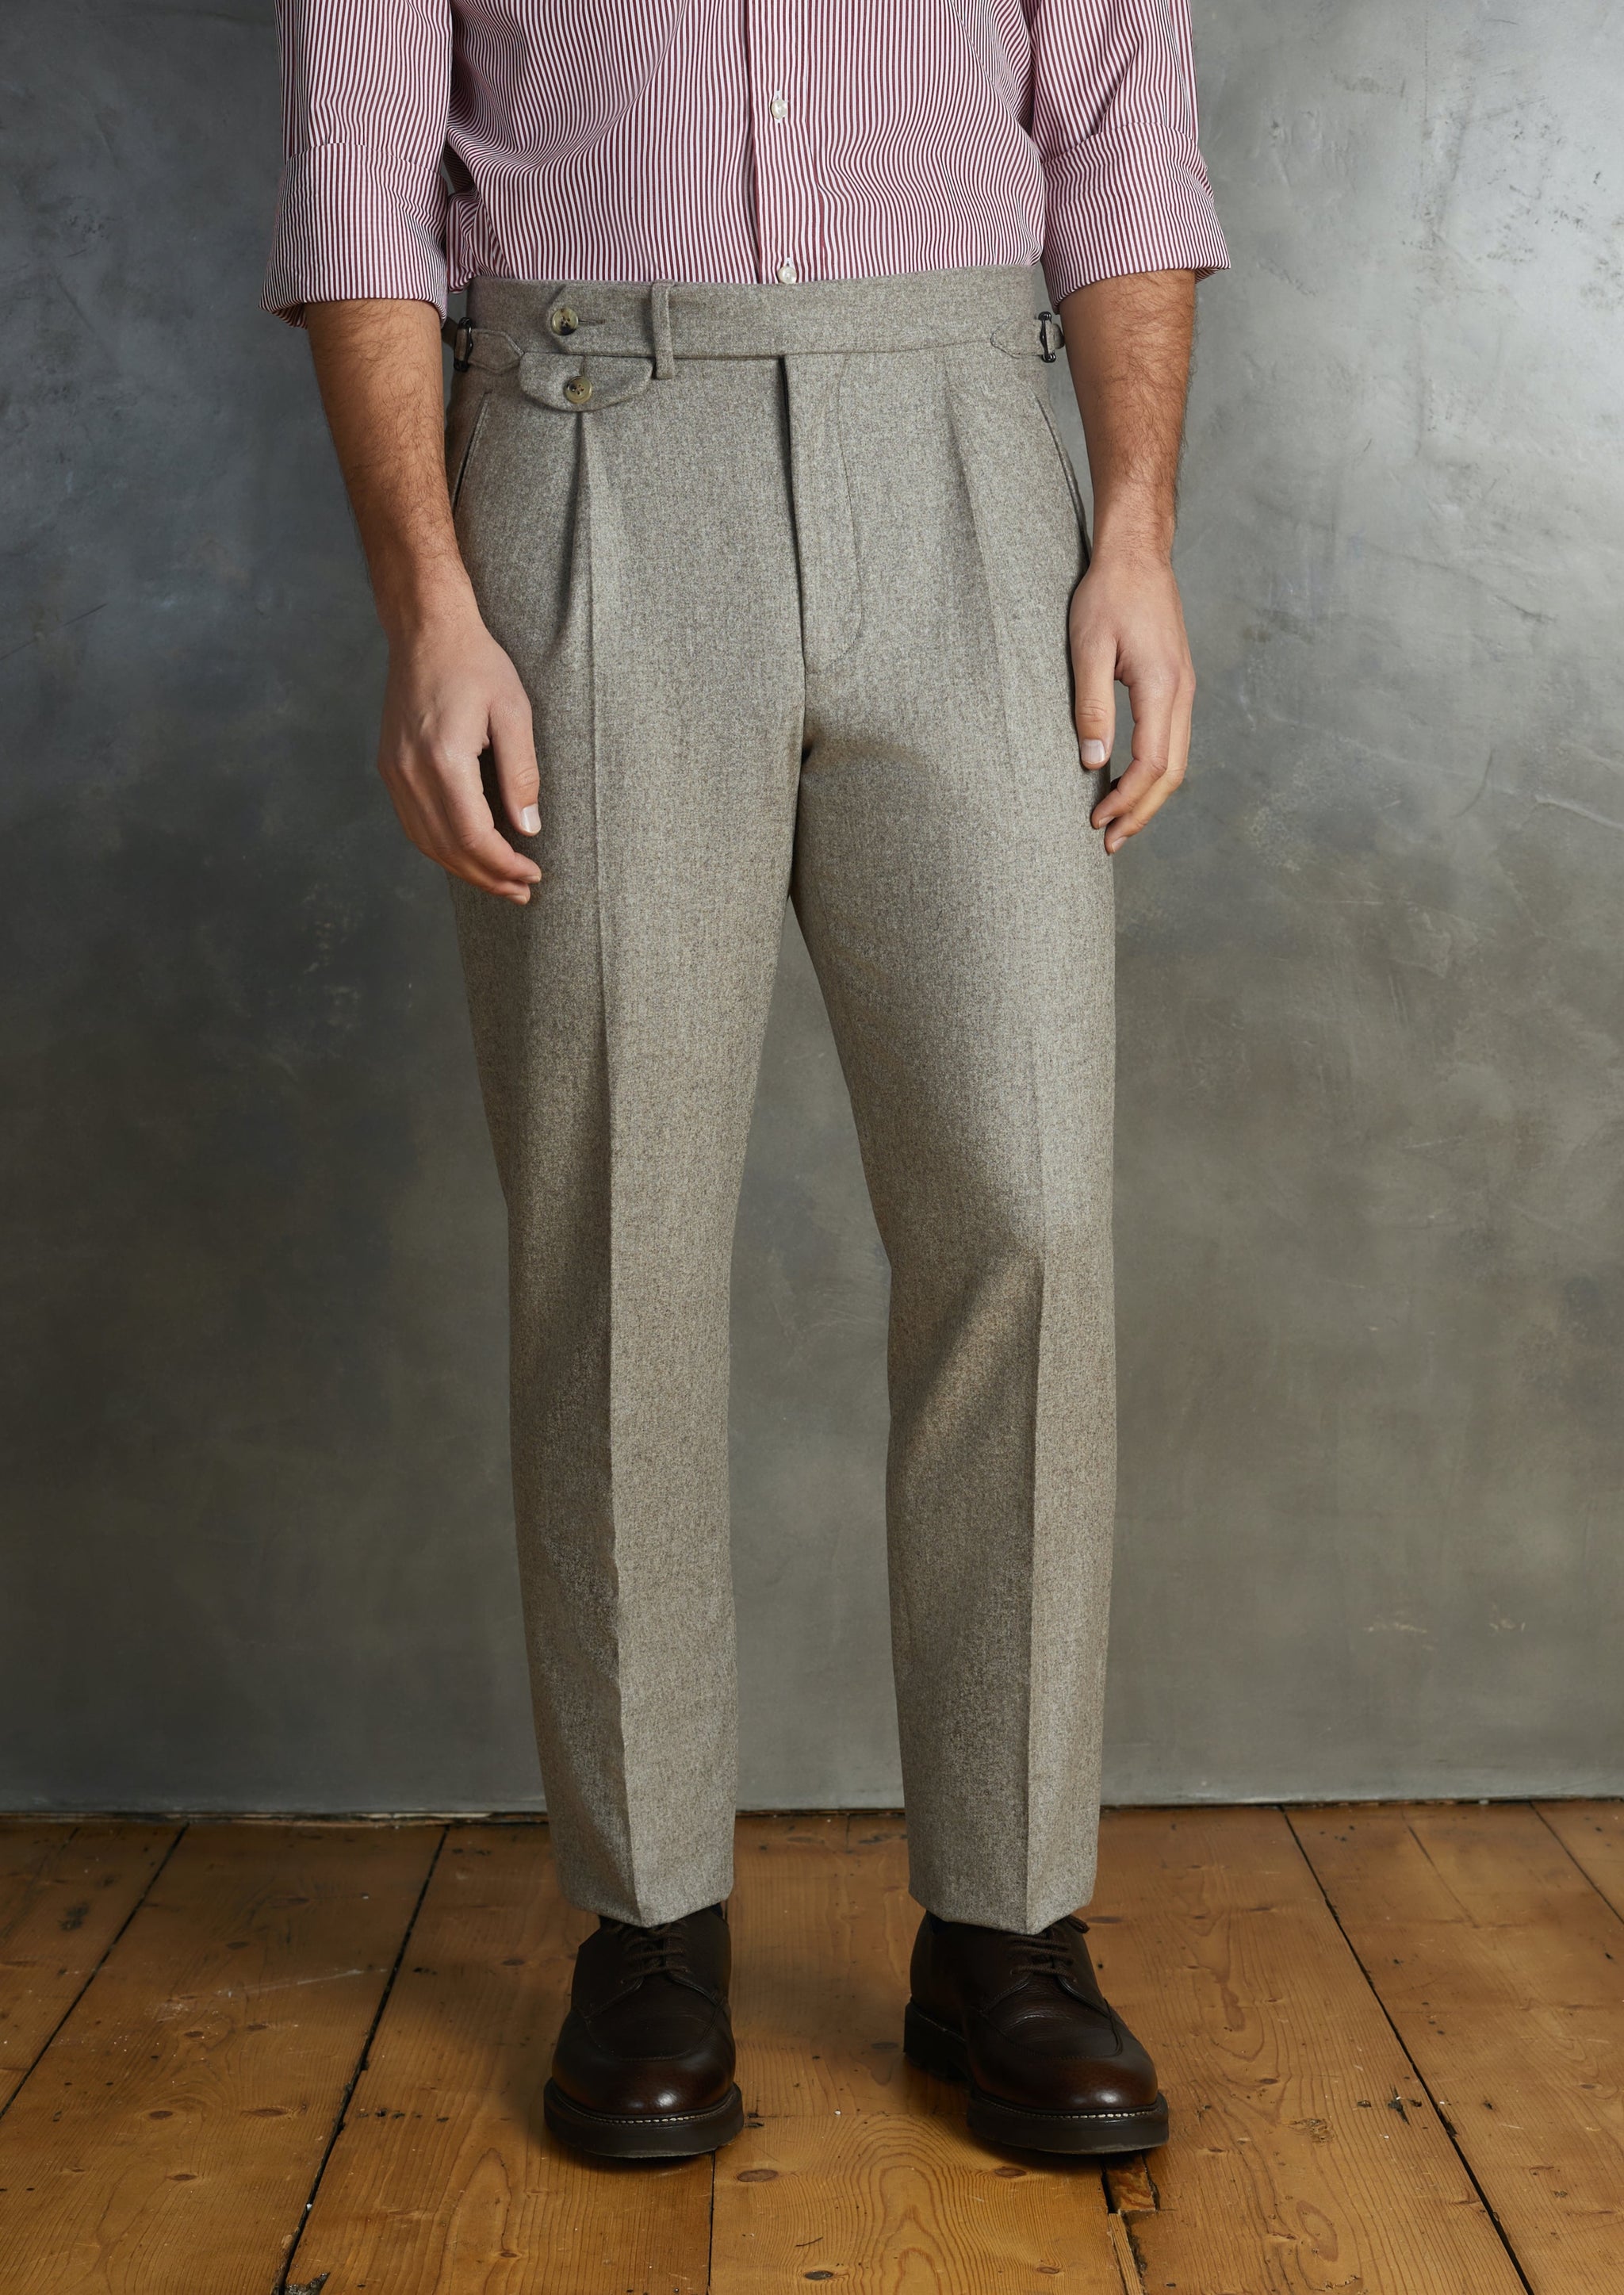 Wool flannel pant in grey